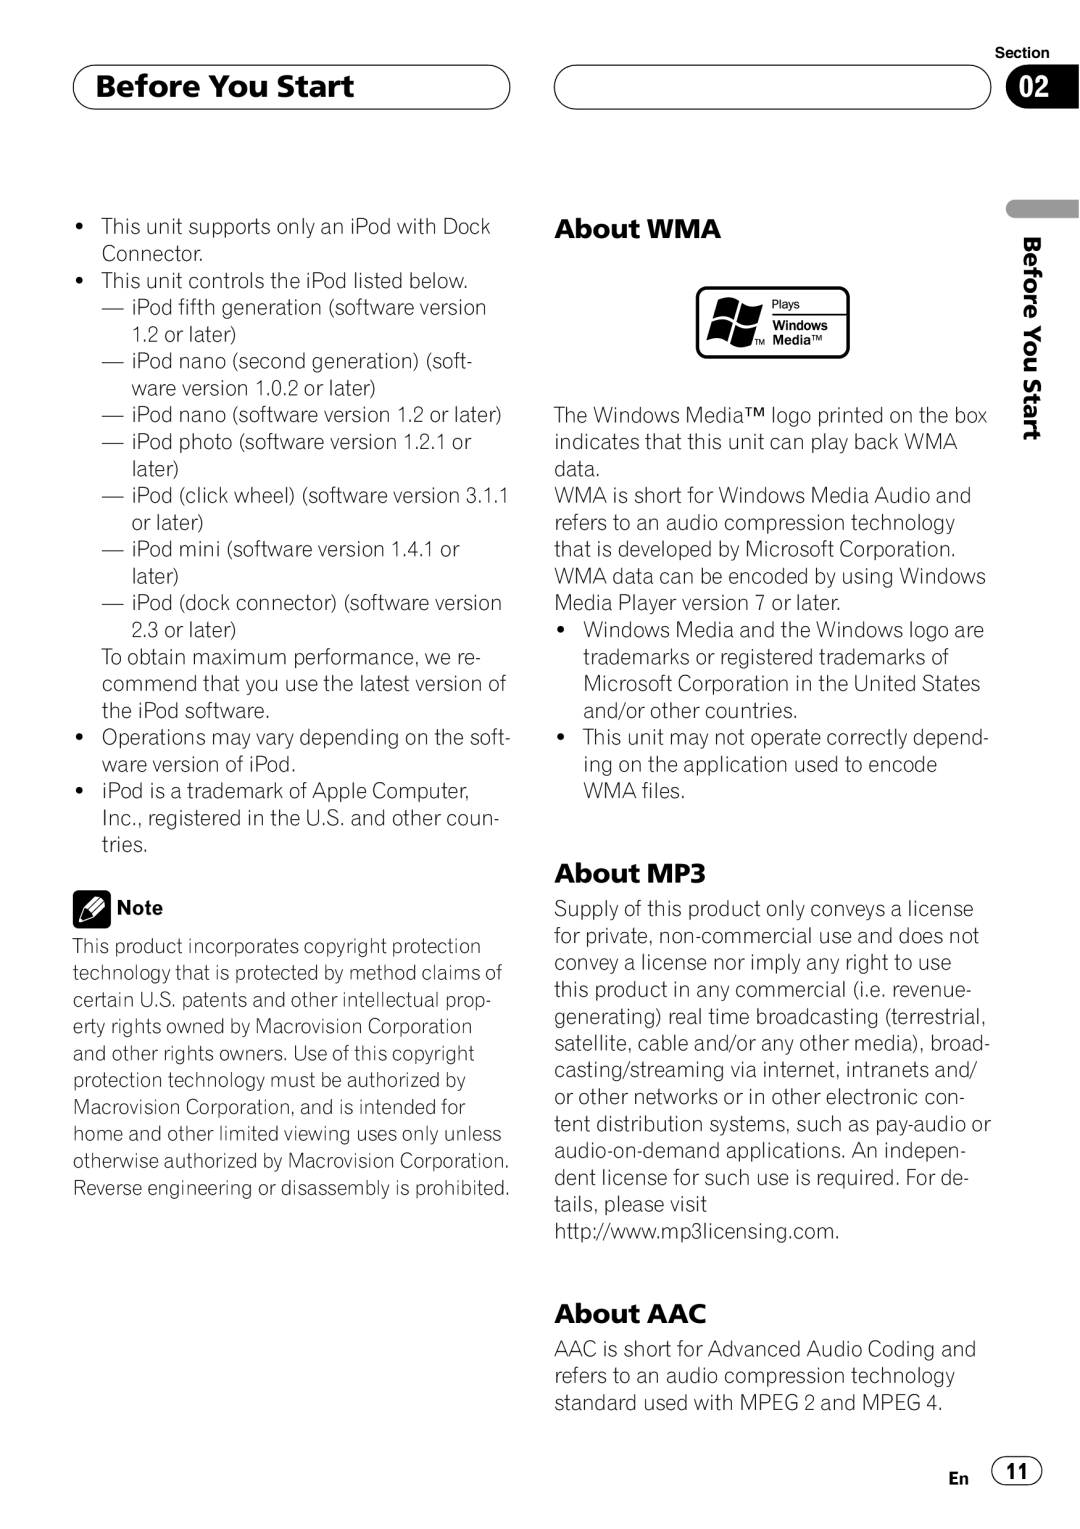 Pioneer AVH-P5900D operation manual About WMA, About MP3, About AAC, Before You Start 